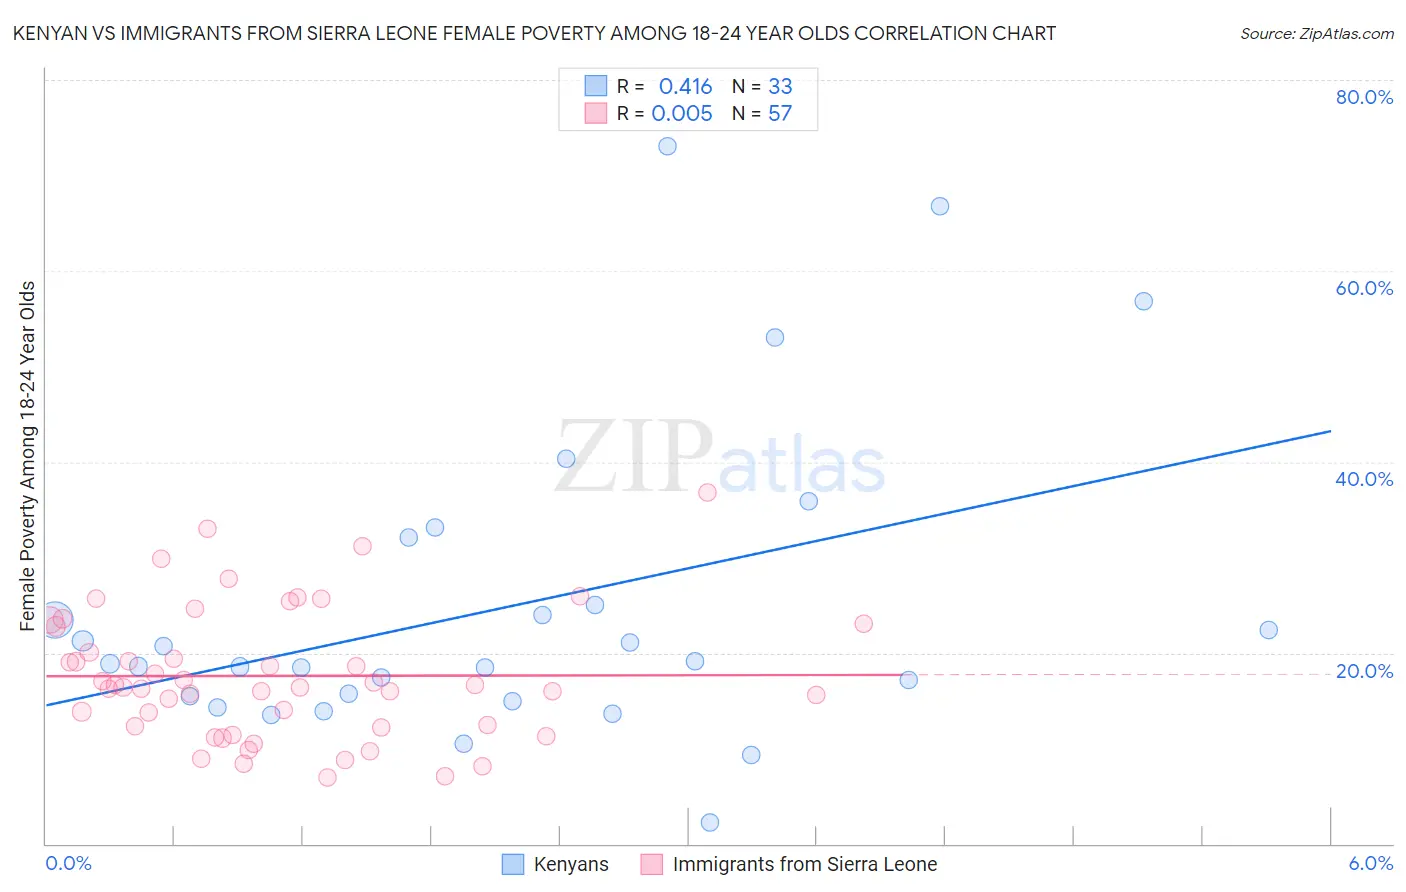 Kenyan vs Immigrants from Sierra Leone Female Poverty Among 18-24 Year Olds